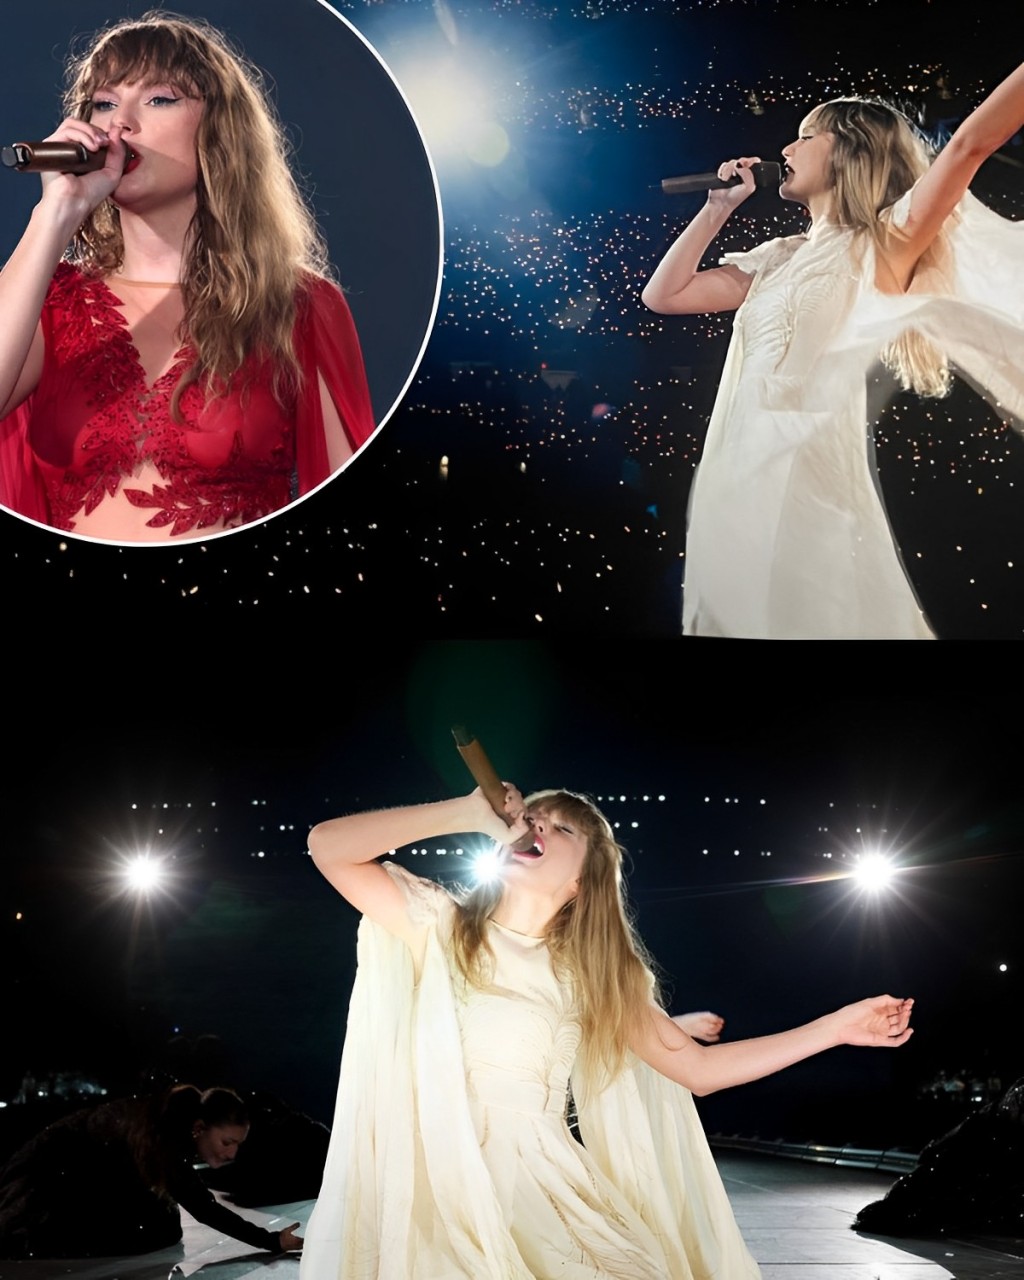 Cover Image for Swiftie’s Eras Tour Footage Shows the Moment She Passed Out During Paris Concert